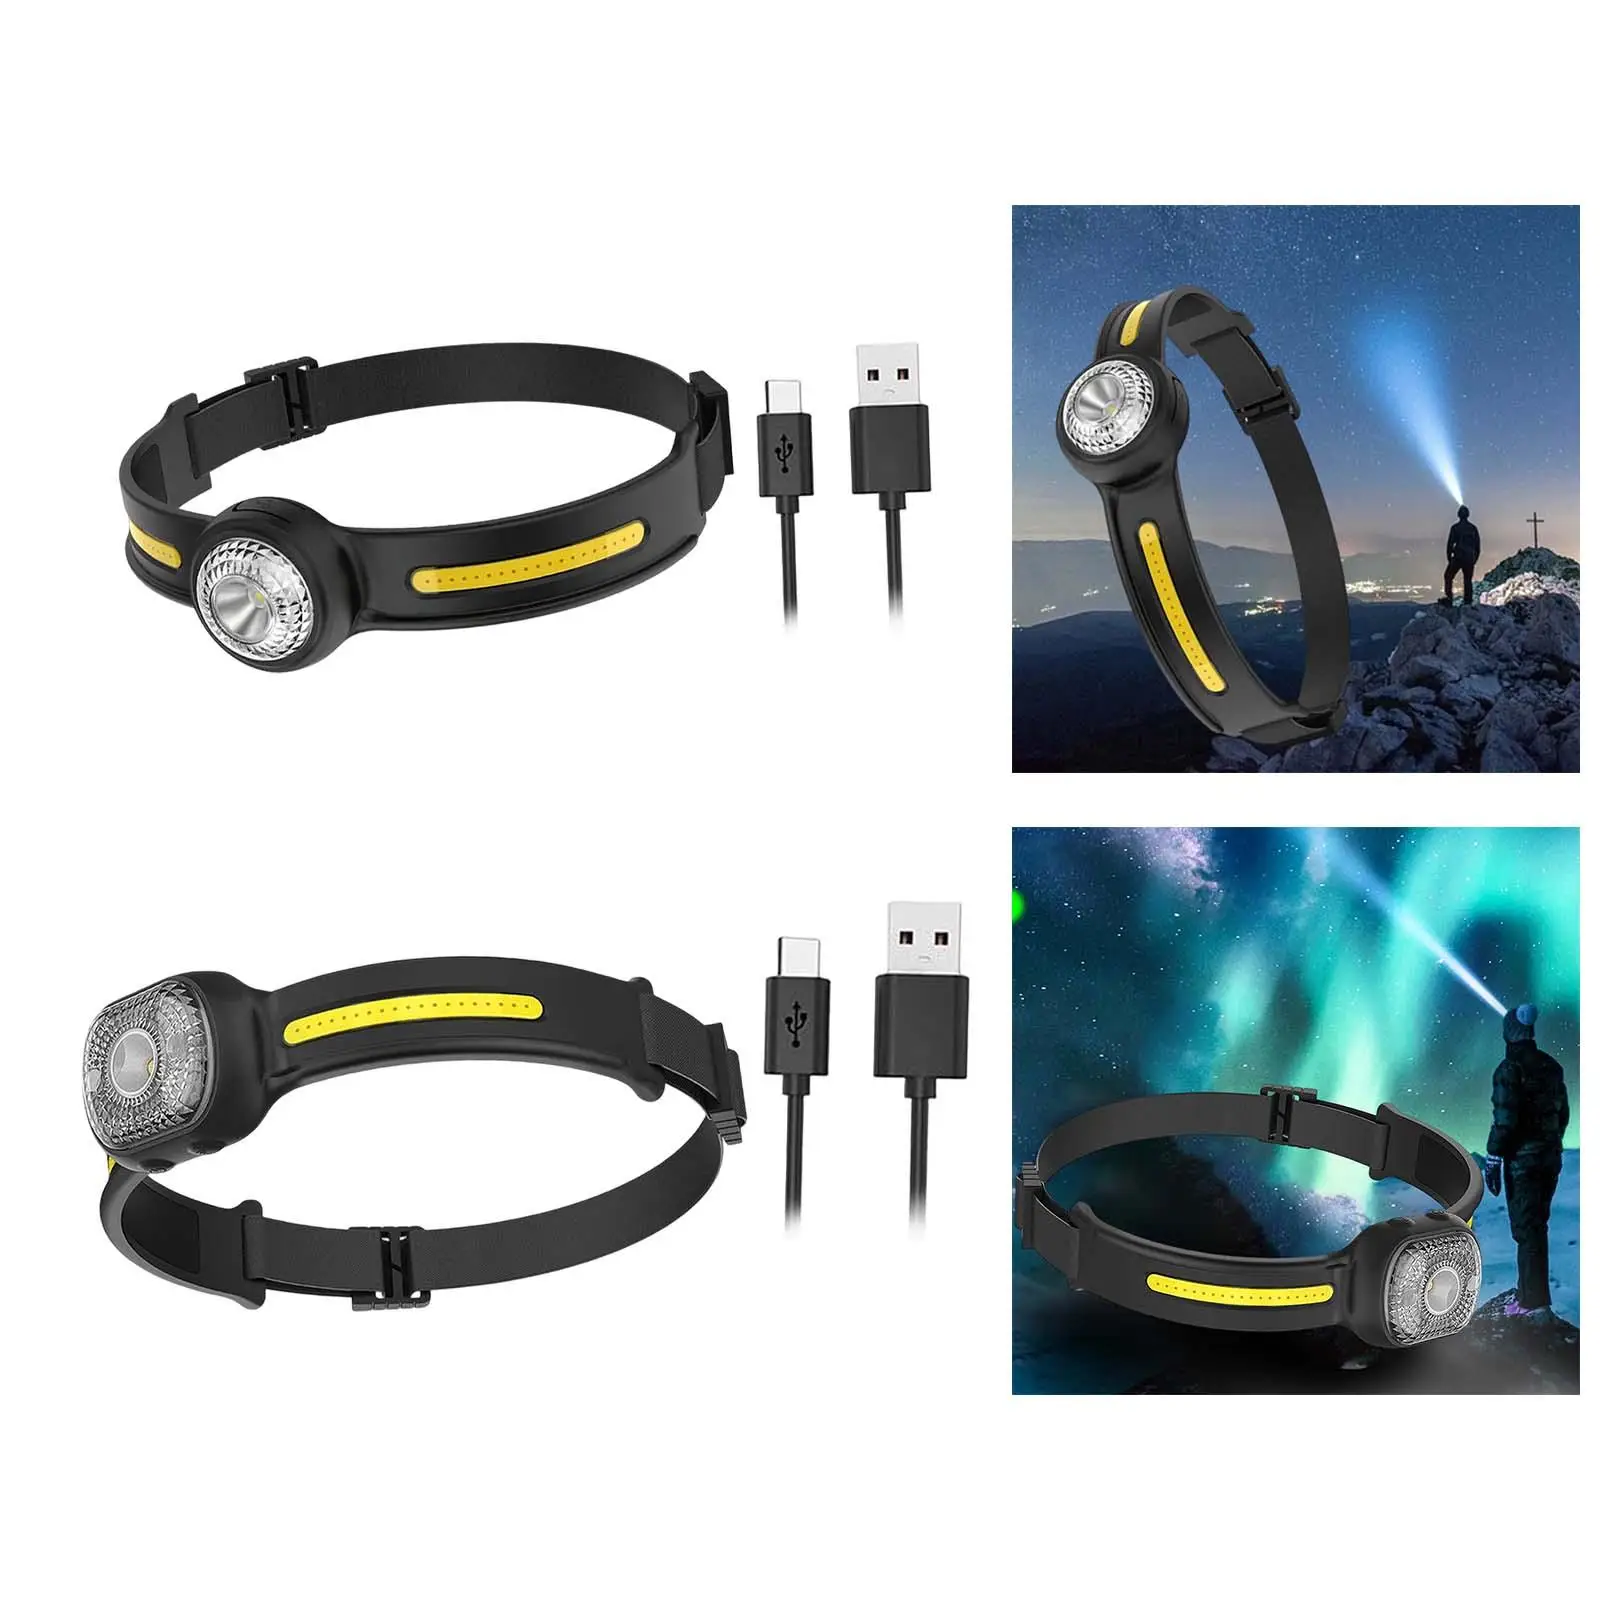 Rechargeable Mini headlamps Lightweight Flashlight Folding 270 Degree Waterproof LED Head lamp for Running Cycling Hiking